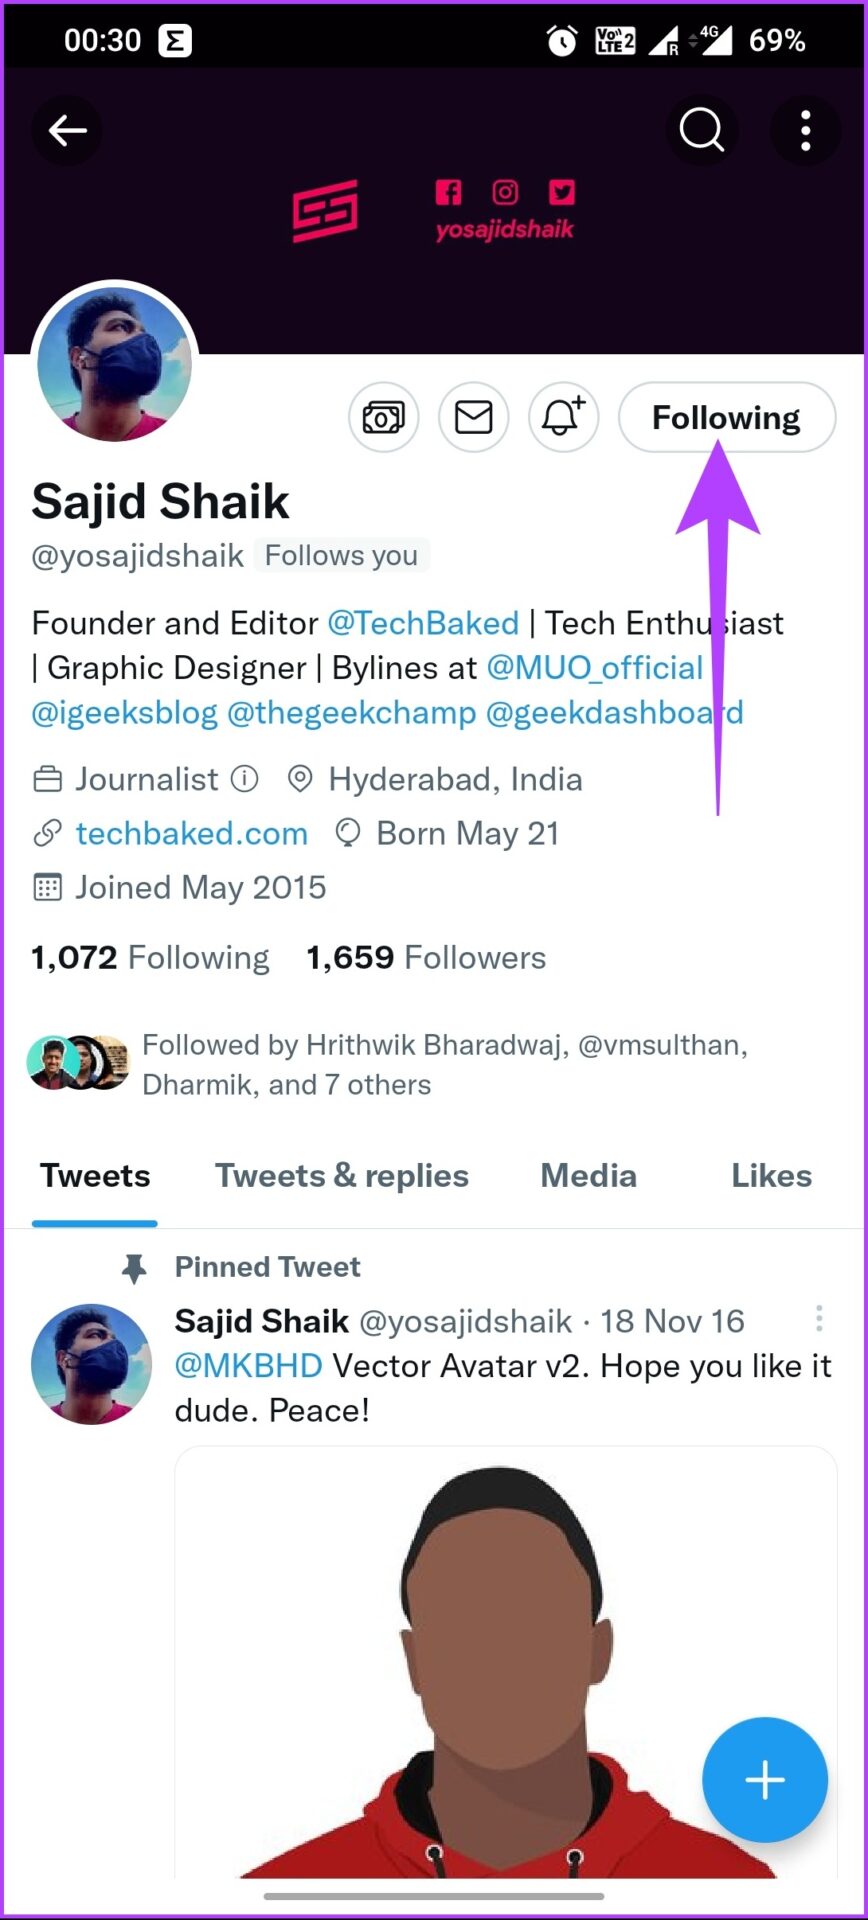 Go to the Twitter Circle Creator's profile